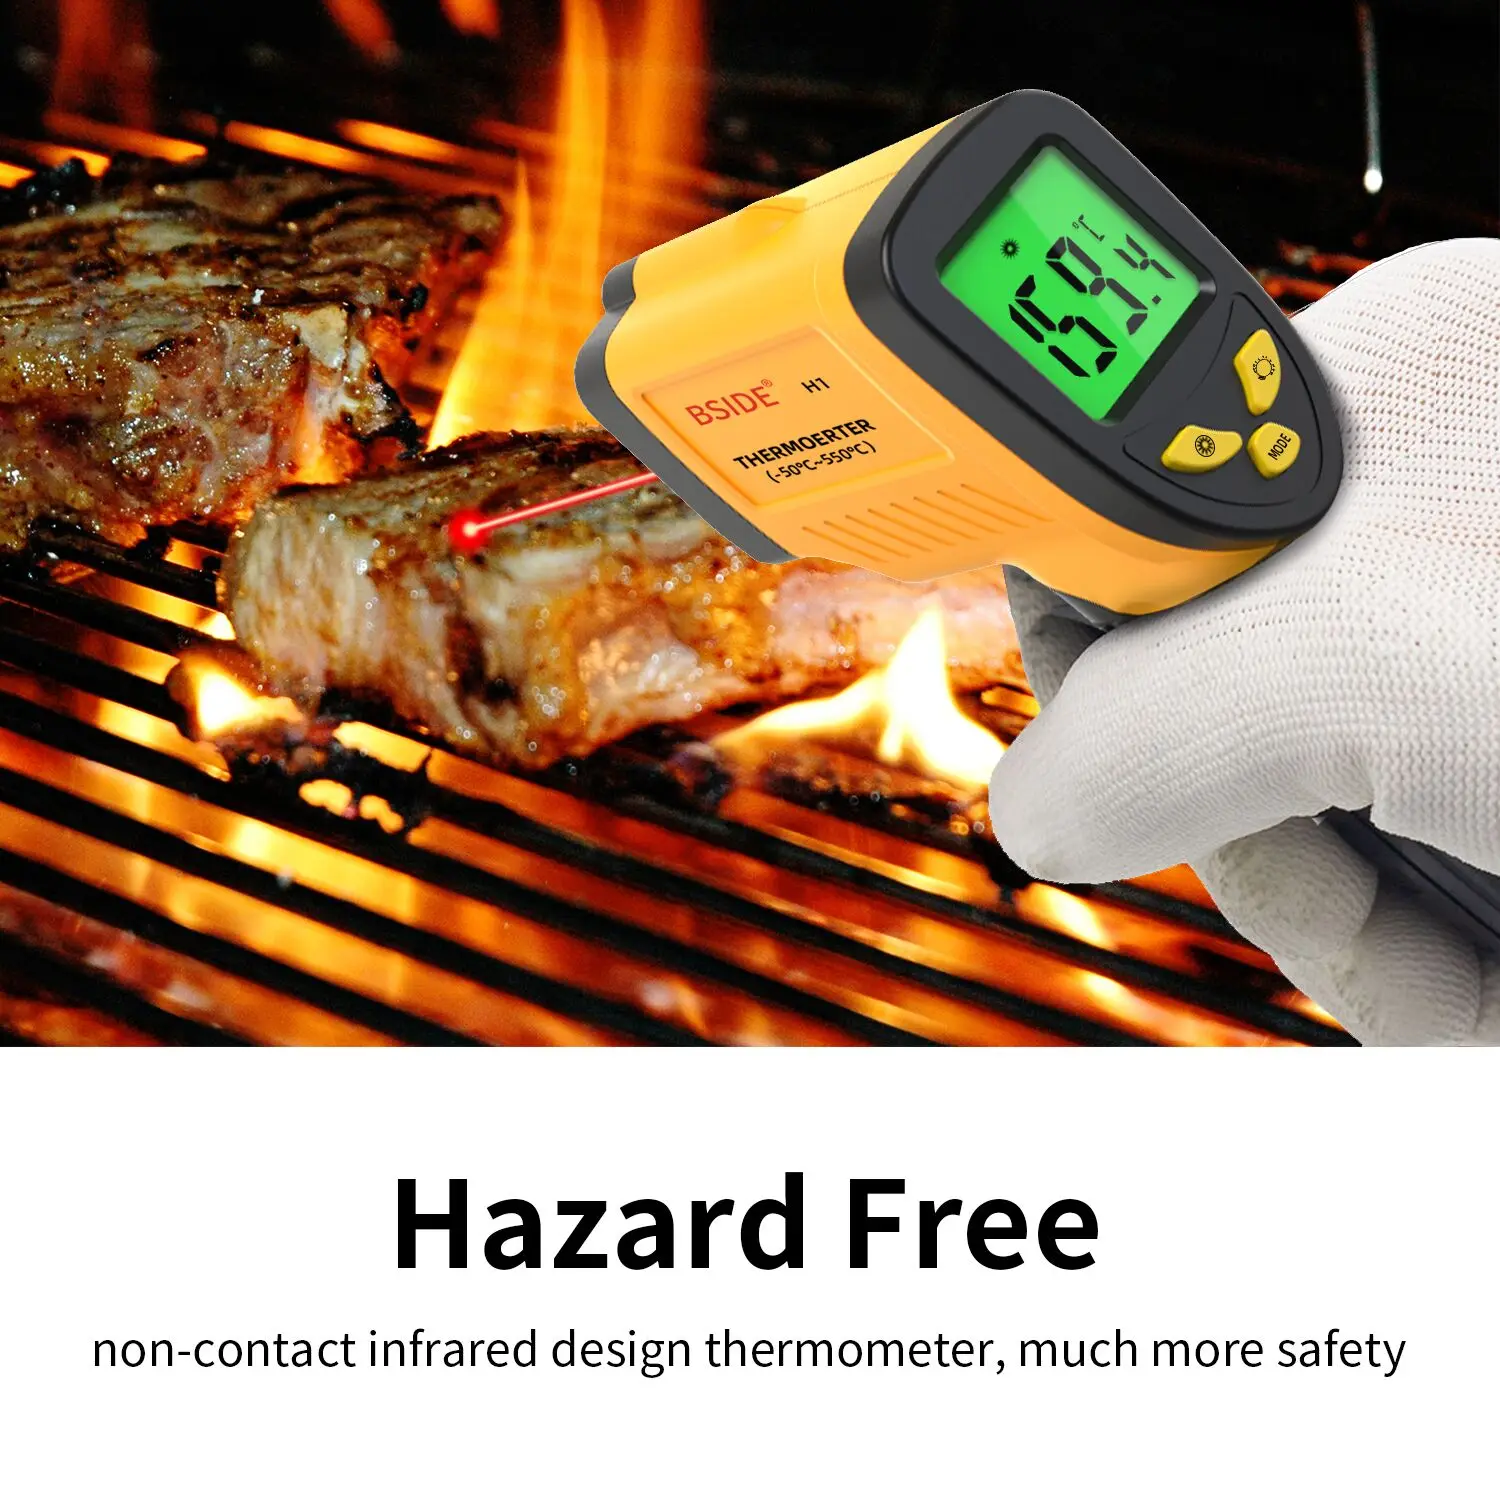 https://ae01.alicdn.com/kf/A0673bd07b1d749b8a6c27de32a03c562G/BSIDE-H1-Digital-Infrared-Thermometer-Non-Contact-Digital-Laser-Thermometer-Gun-For-Meat-Buffalo-Milk-BBQ.jpg